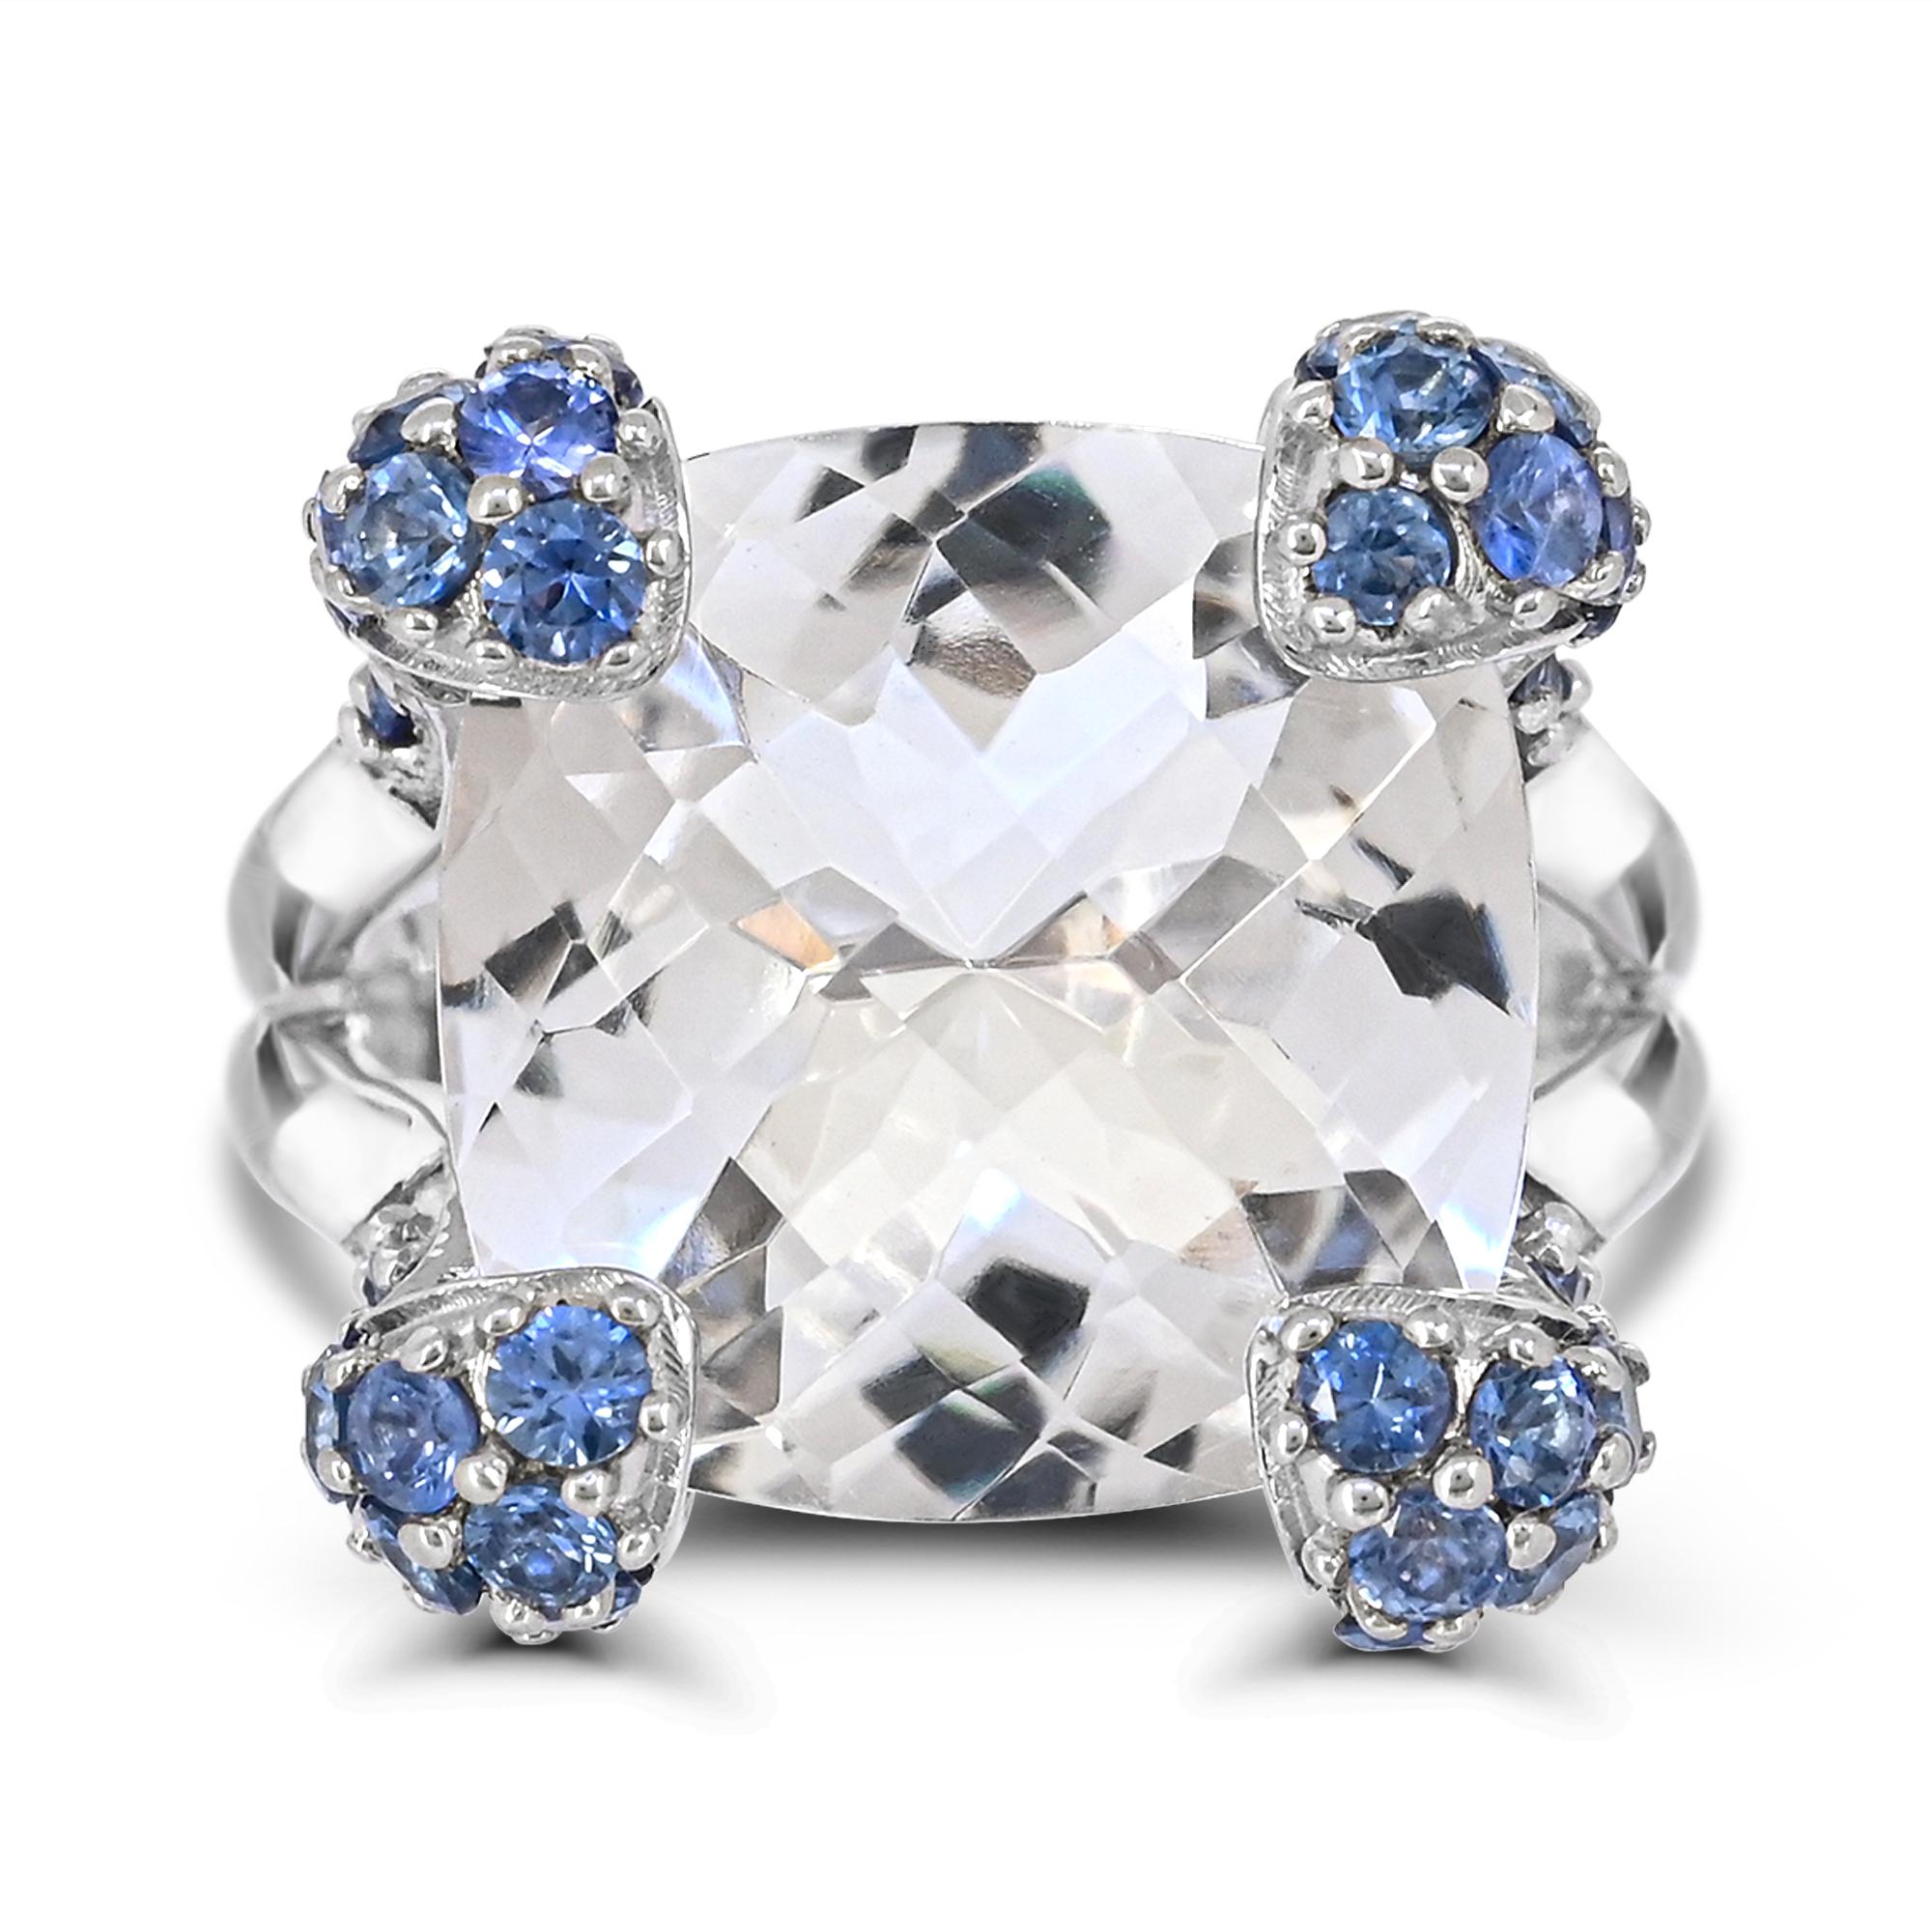 Indulge in the uniqueness of our Cushion-Cut Rock Crystal and Blue Sapphire Accented Sterling Silver Cocktail Ring. Crafted with meticulous attention to detail, this ring boasts a spectacular combination of one 14-3/8 carat cushion-cut rock crystal